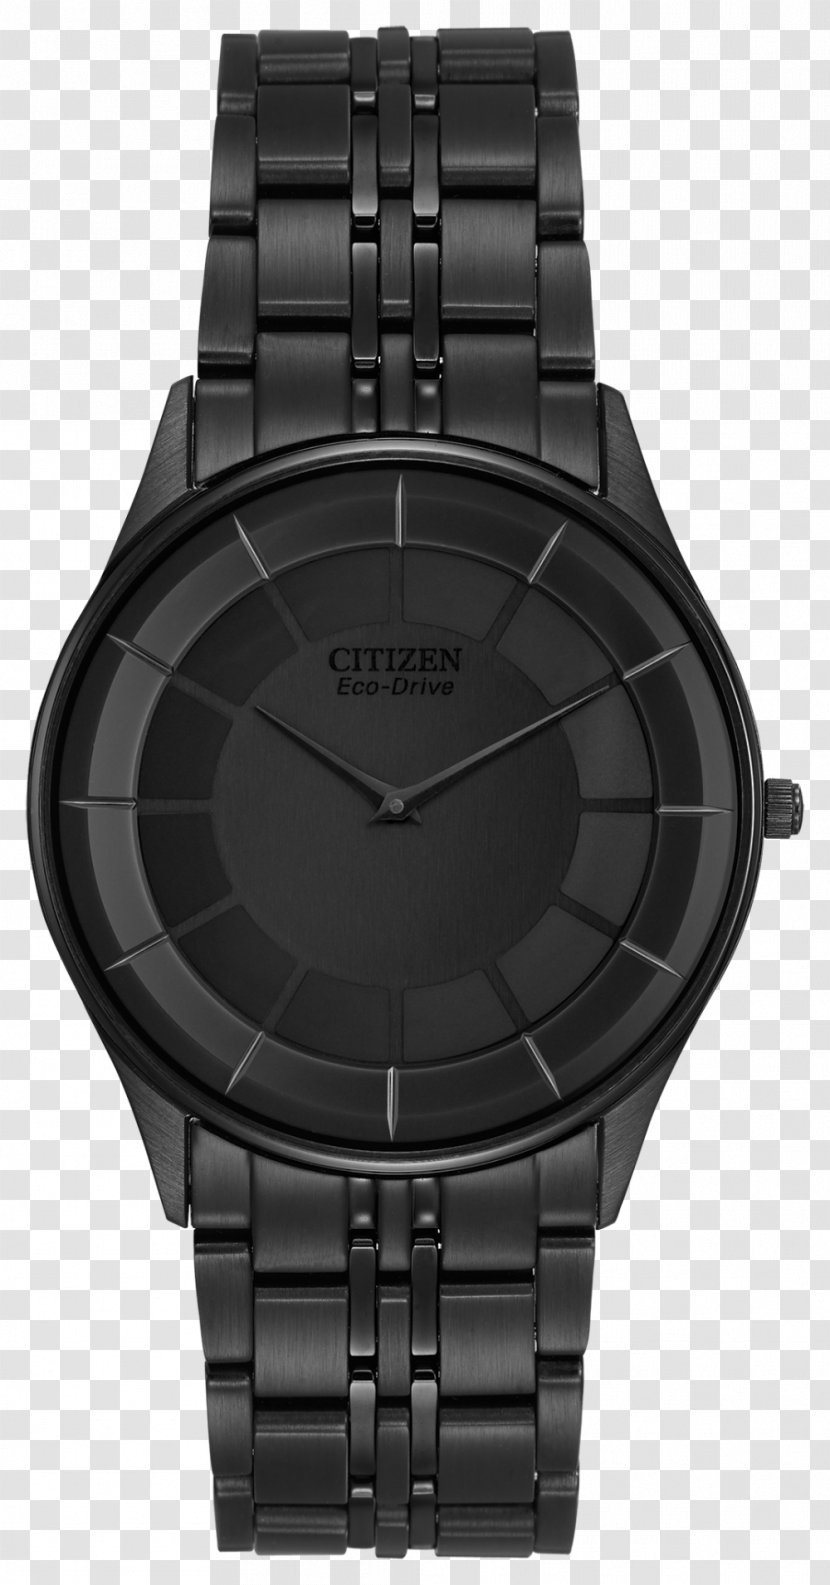 Citizen Men's Eco-Drive Stiletto Holdings Solar-powered Watch - Solarpowered Transparent PNG